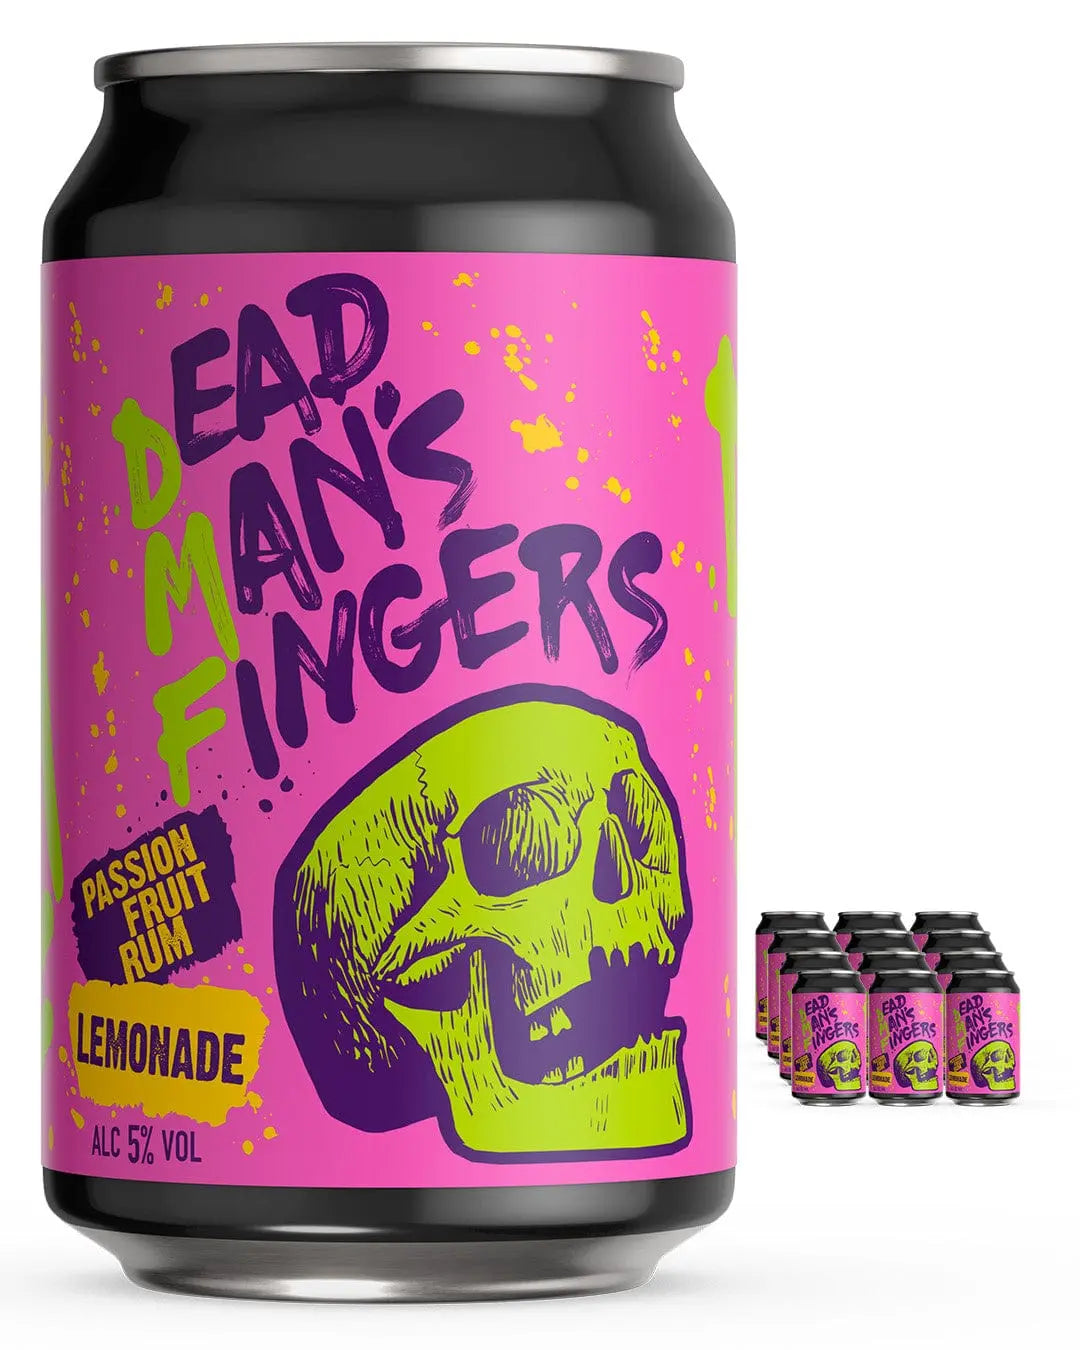 Dead Man’s Fingers Passion Fruit Rum with Lemonade Multipack, 12 x 330 ml Ready Made Cocktails